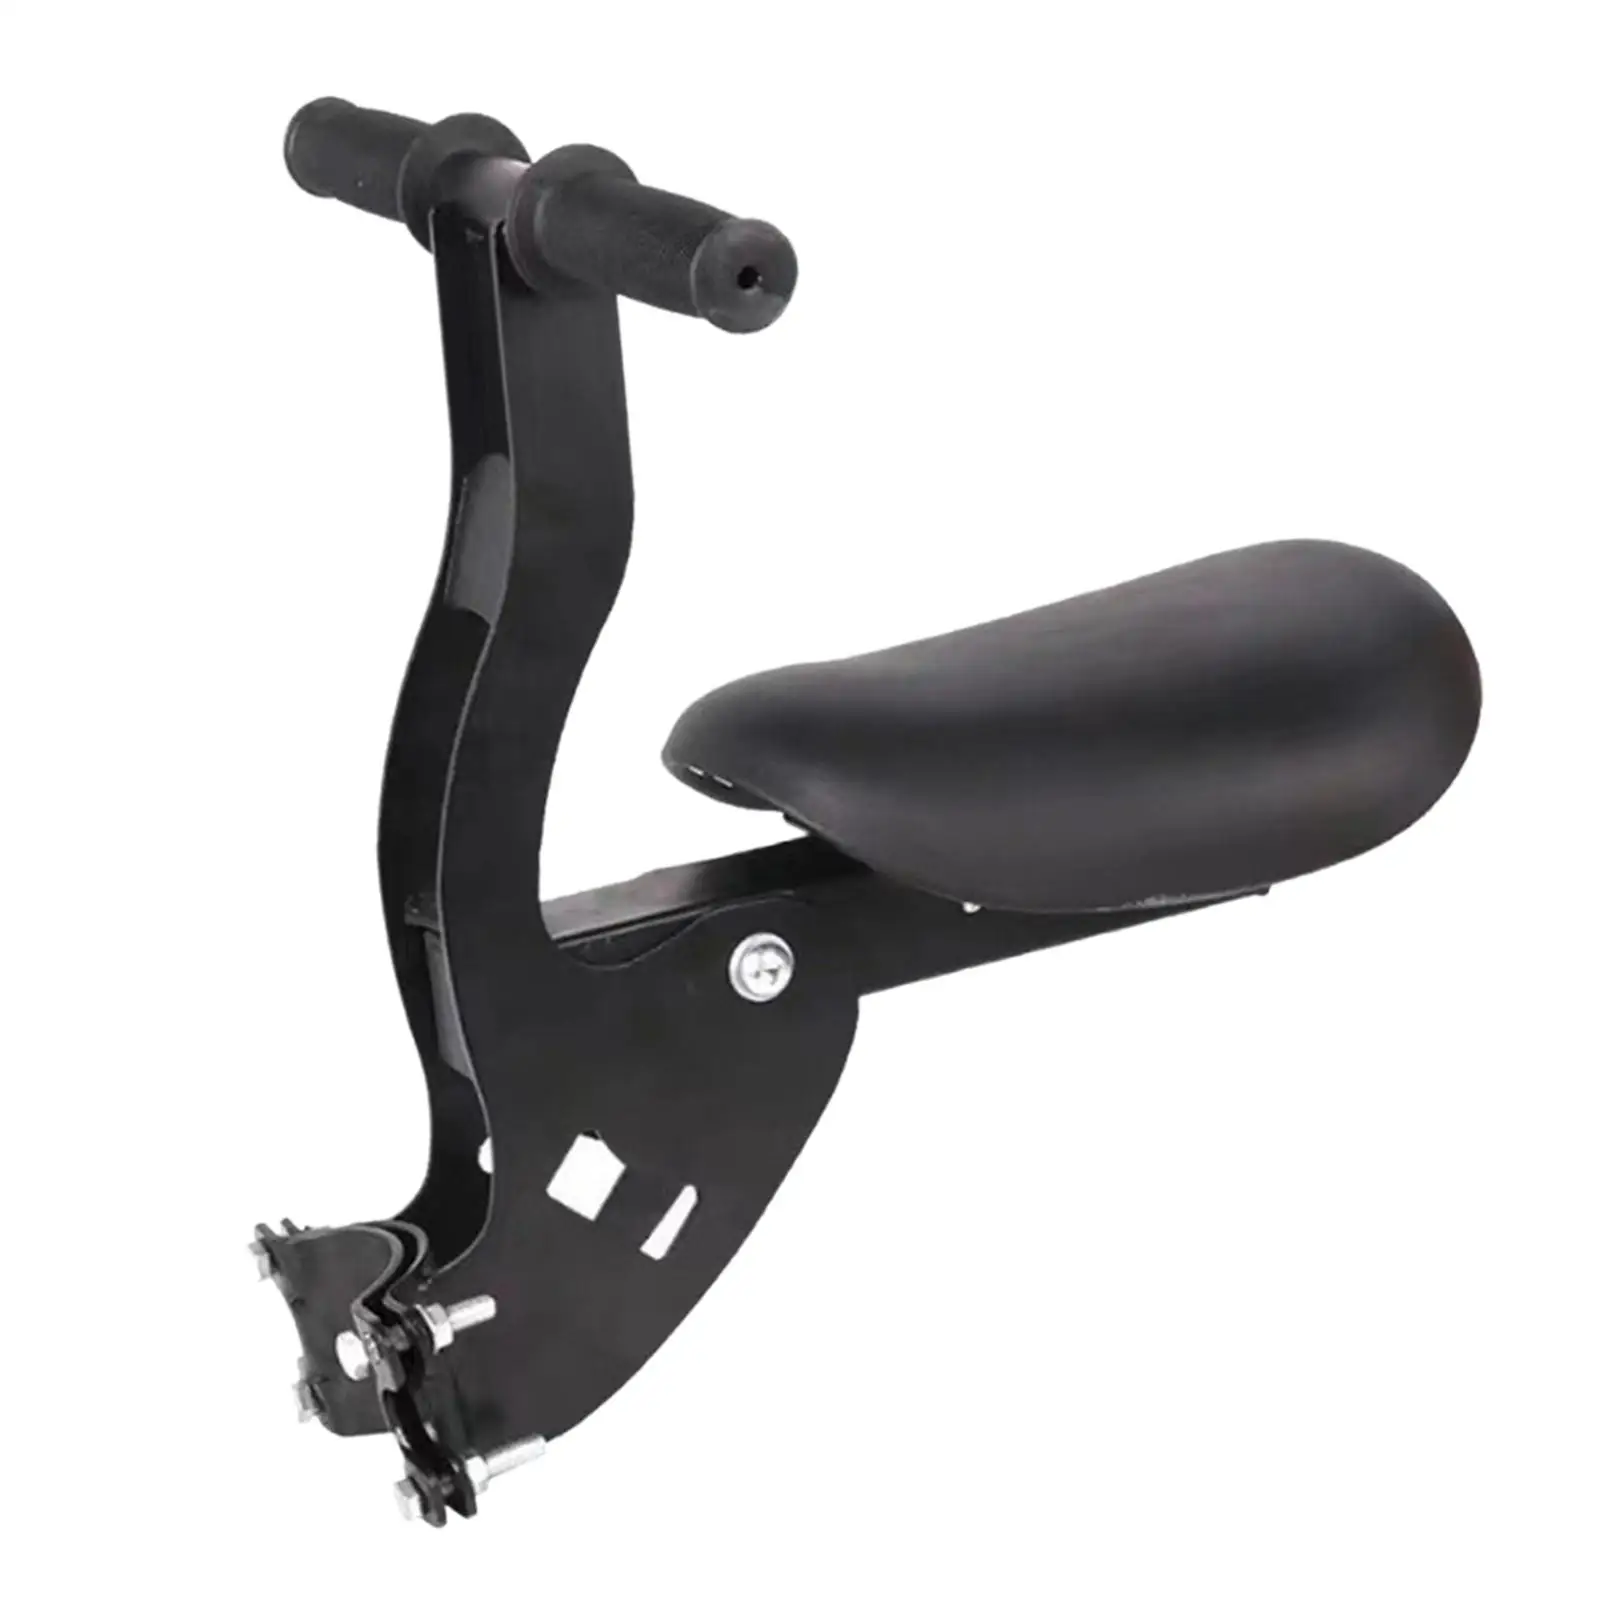 Kids Bike Seat Front Mounted Electromobile Baby Seat Bicycle Carrier Portable Universal for Mountain Bike Road Bikes